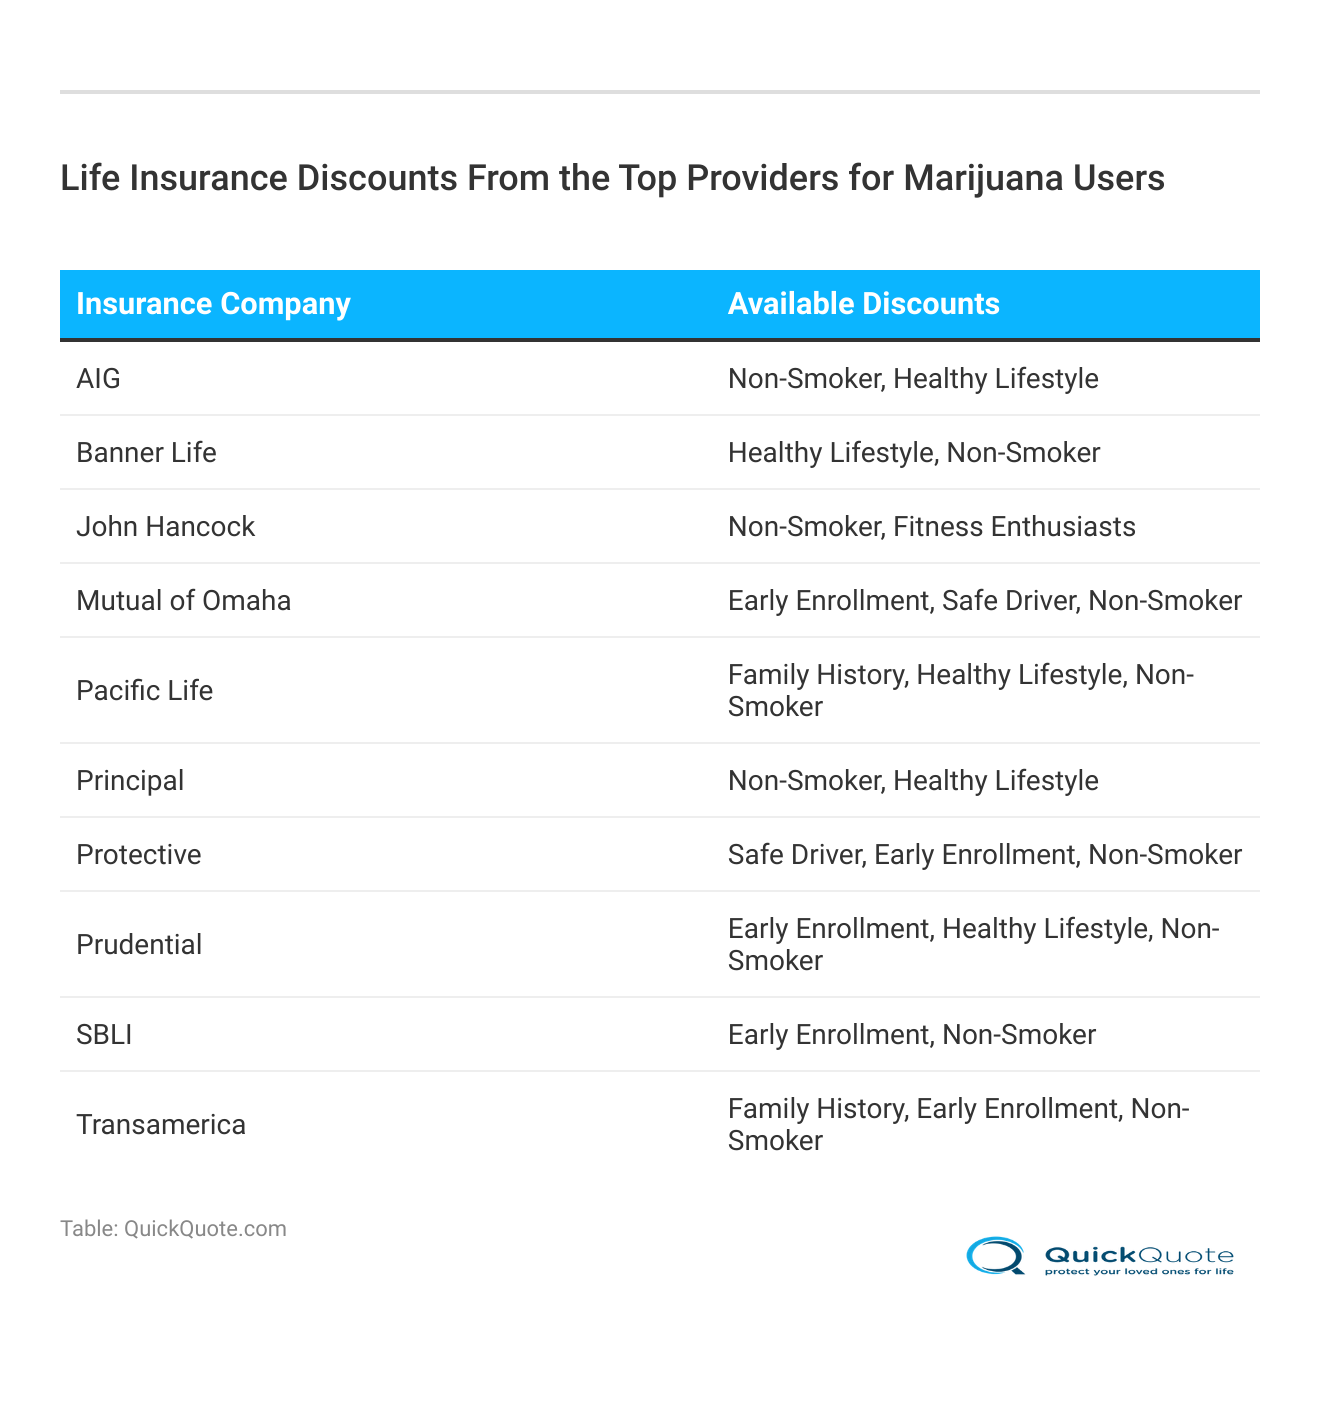 <h3>Life Insurance Discounts From the Top Providers for Marijuana Users</h3>